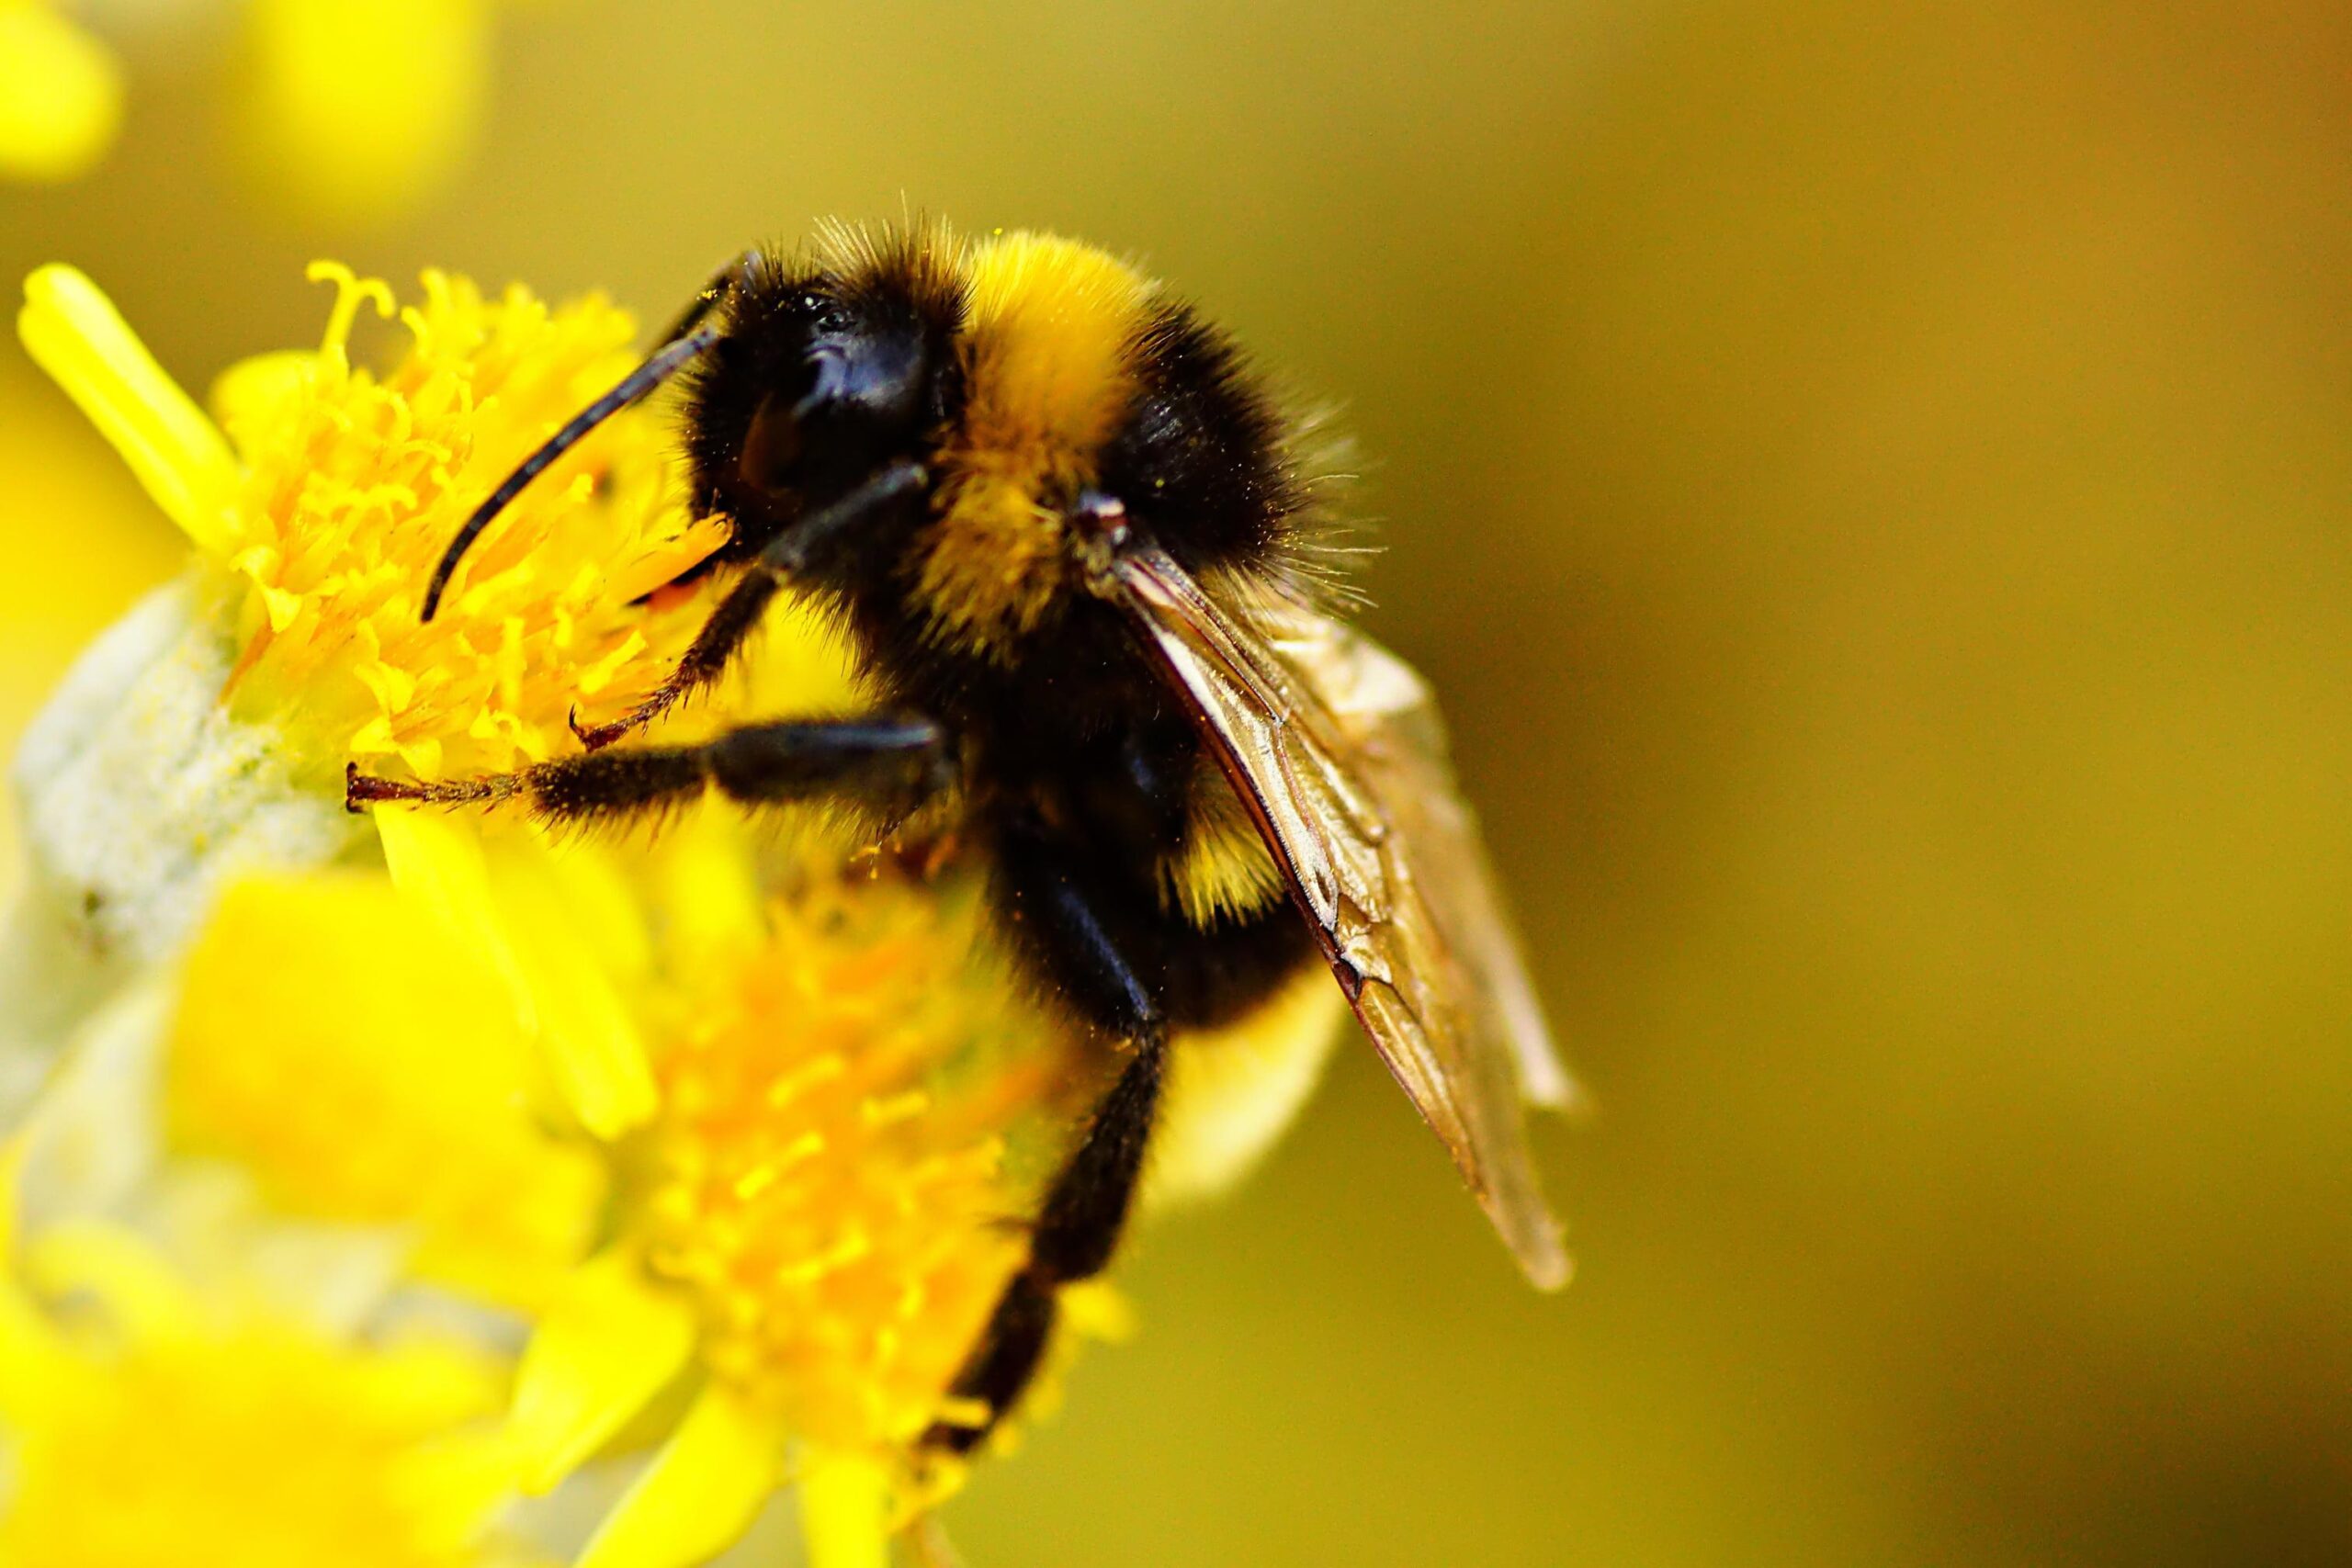 Bumblebee Insect 1080p Wallpaper, Bumblebee Insect, Animal